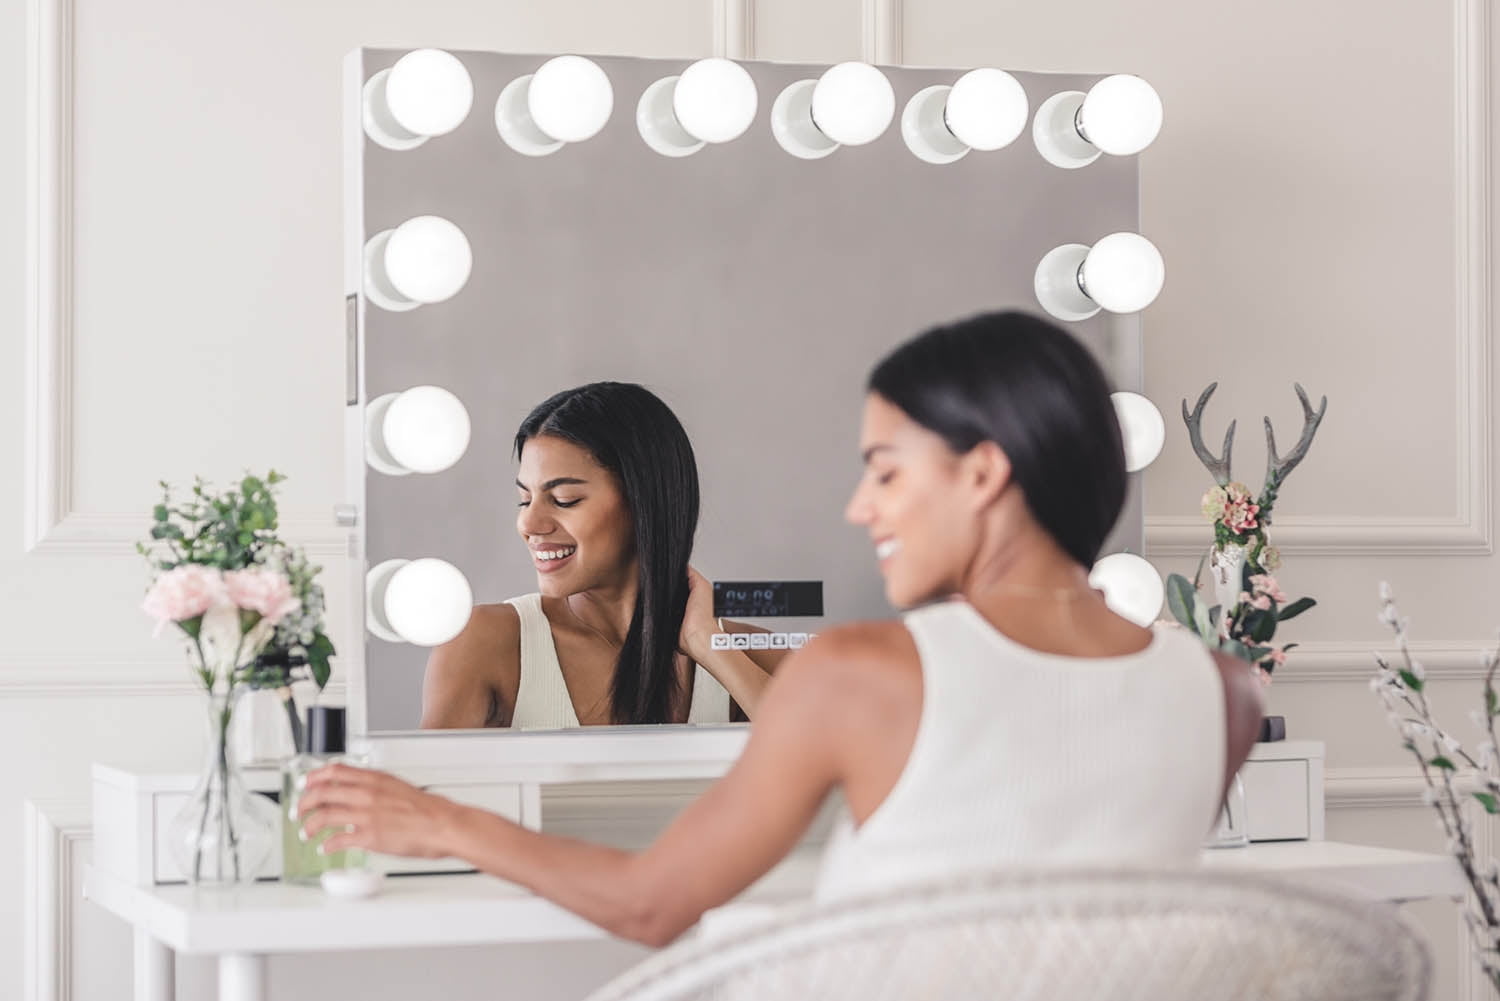 Reigncharm Hollywood Vanity Mirror With, Reigncharm Hollywood Vanity Mirror With Bluetooth Speakers